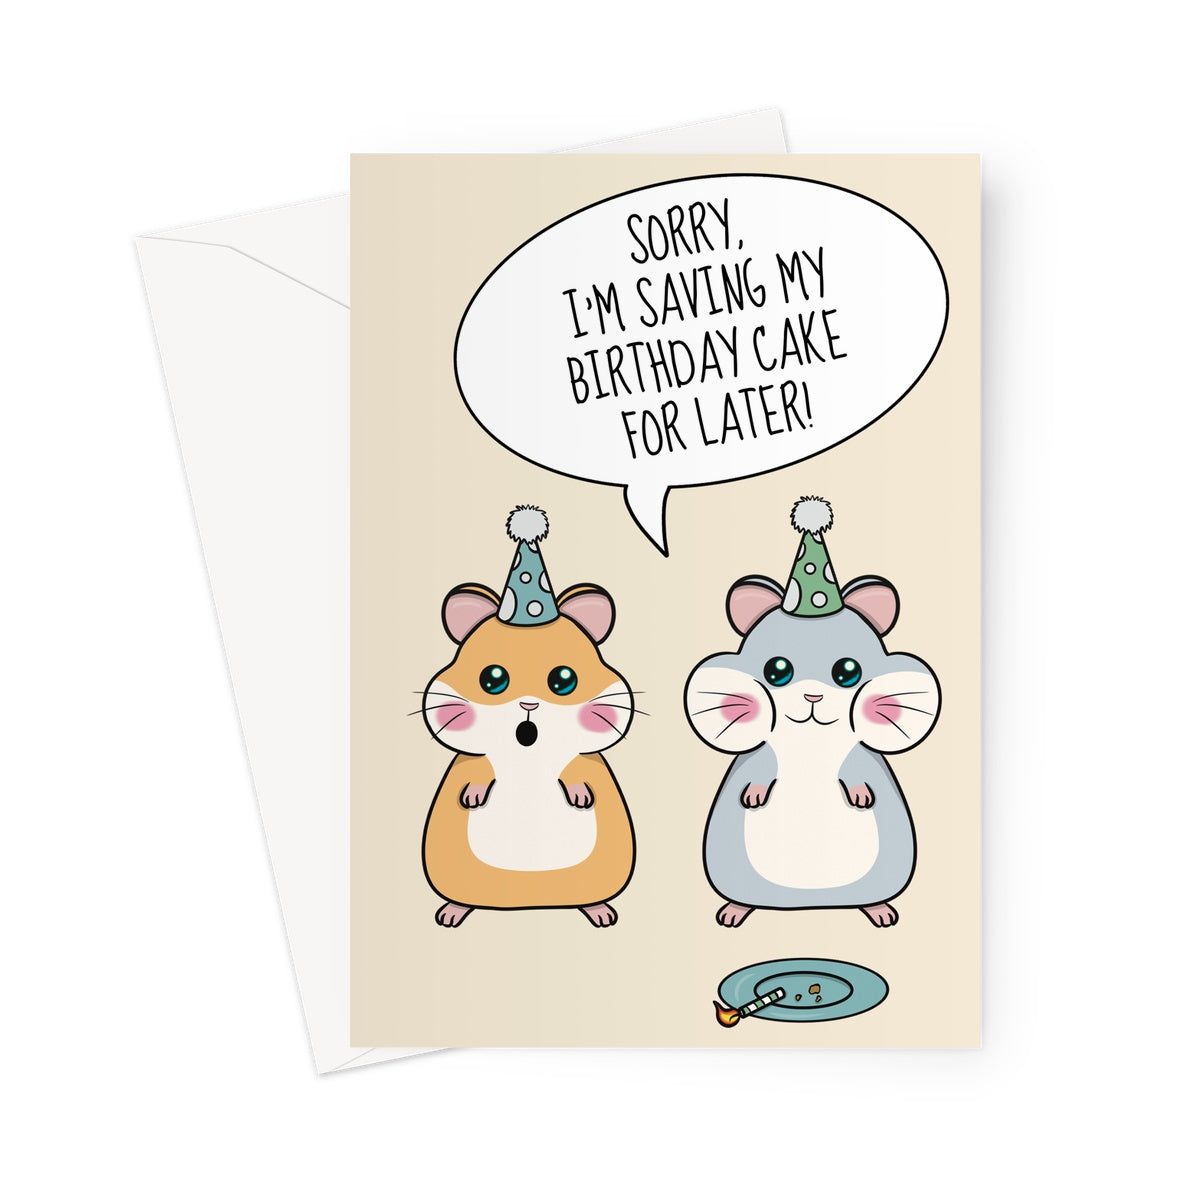 A cute Hamster themed birthday card for a friend who loves birthday cake.